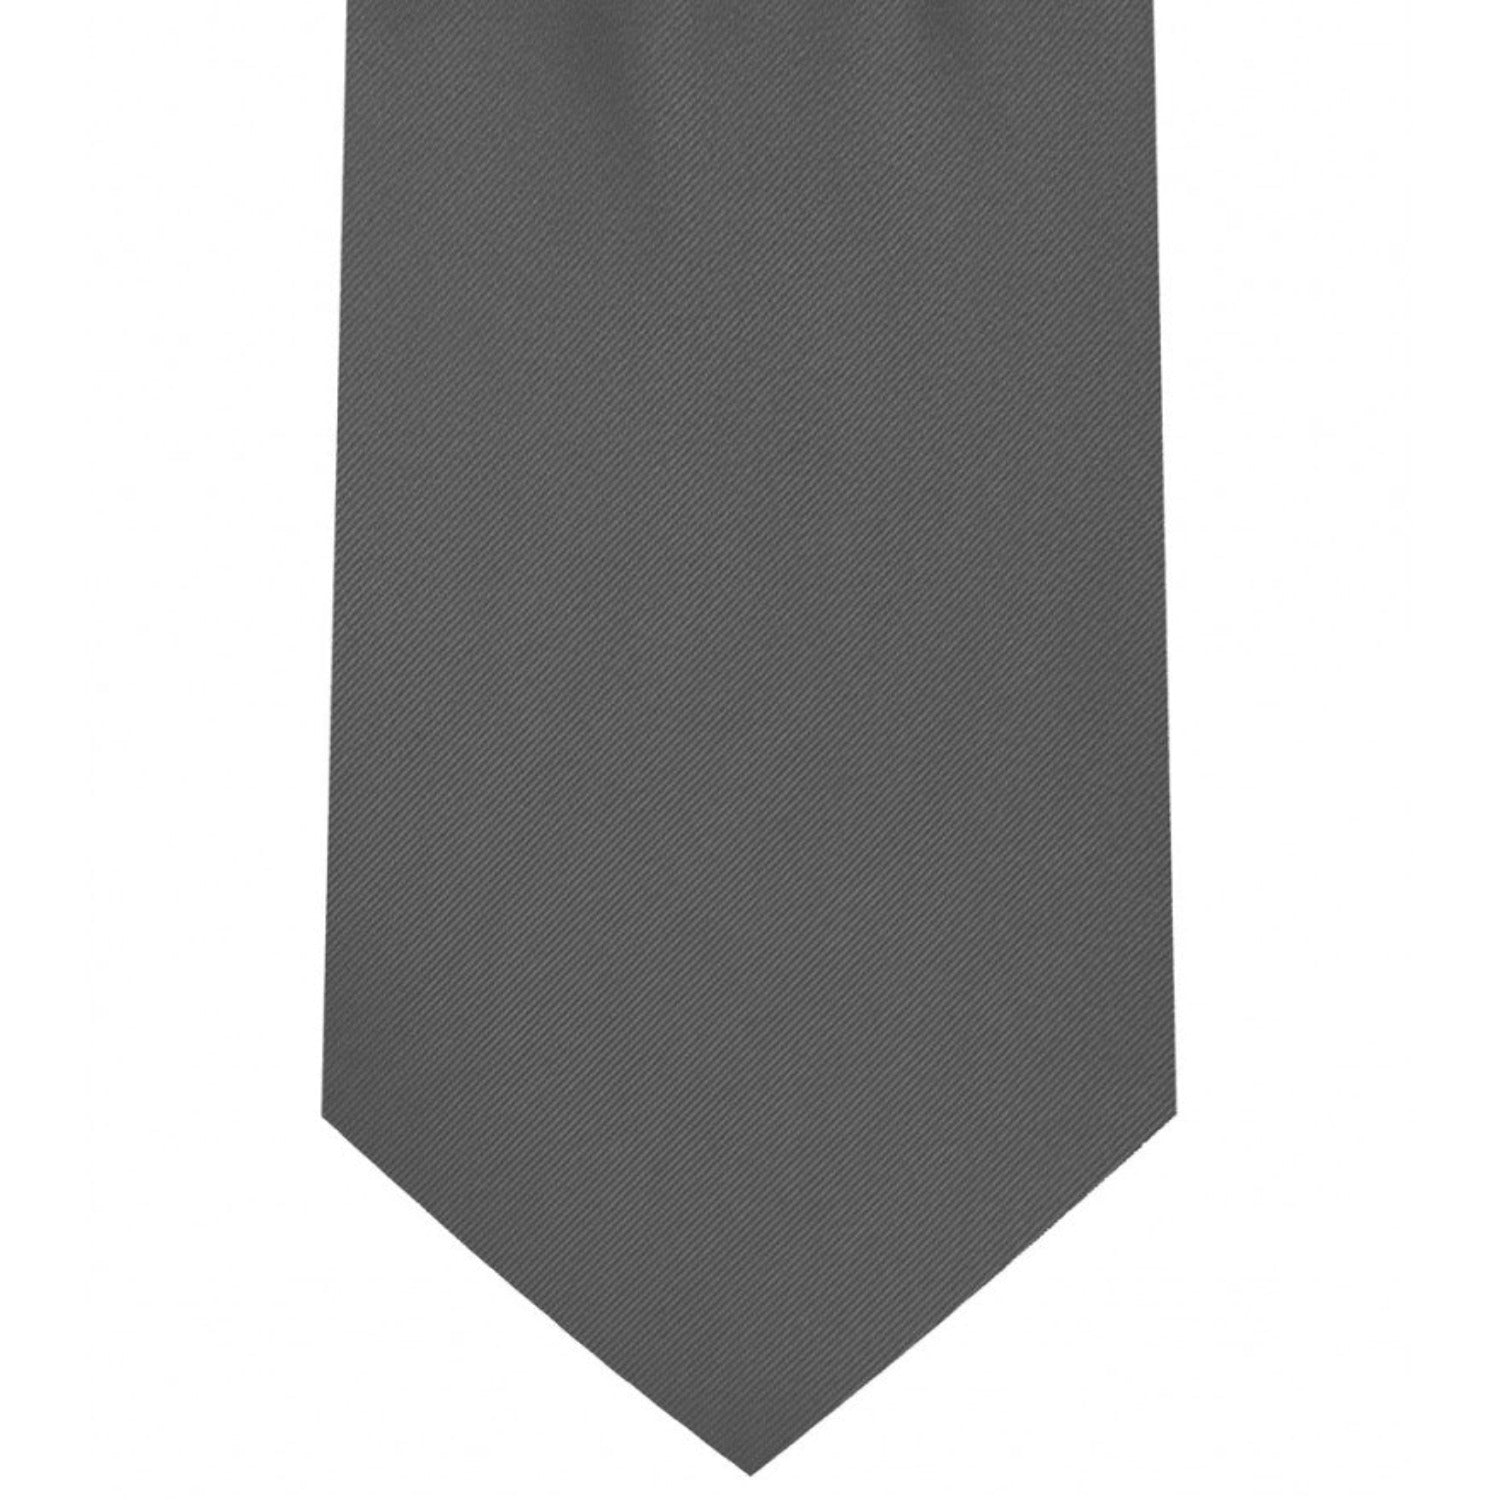 Classic Dark Grey Tie Regular width 3.5 inches With Matching Pocket Square | KCT Menswear 